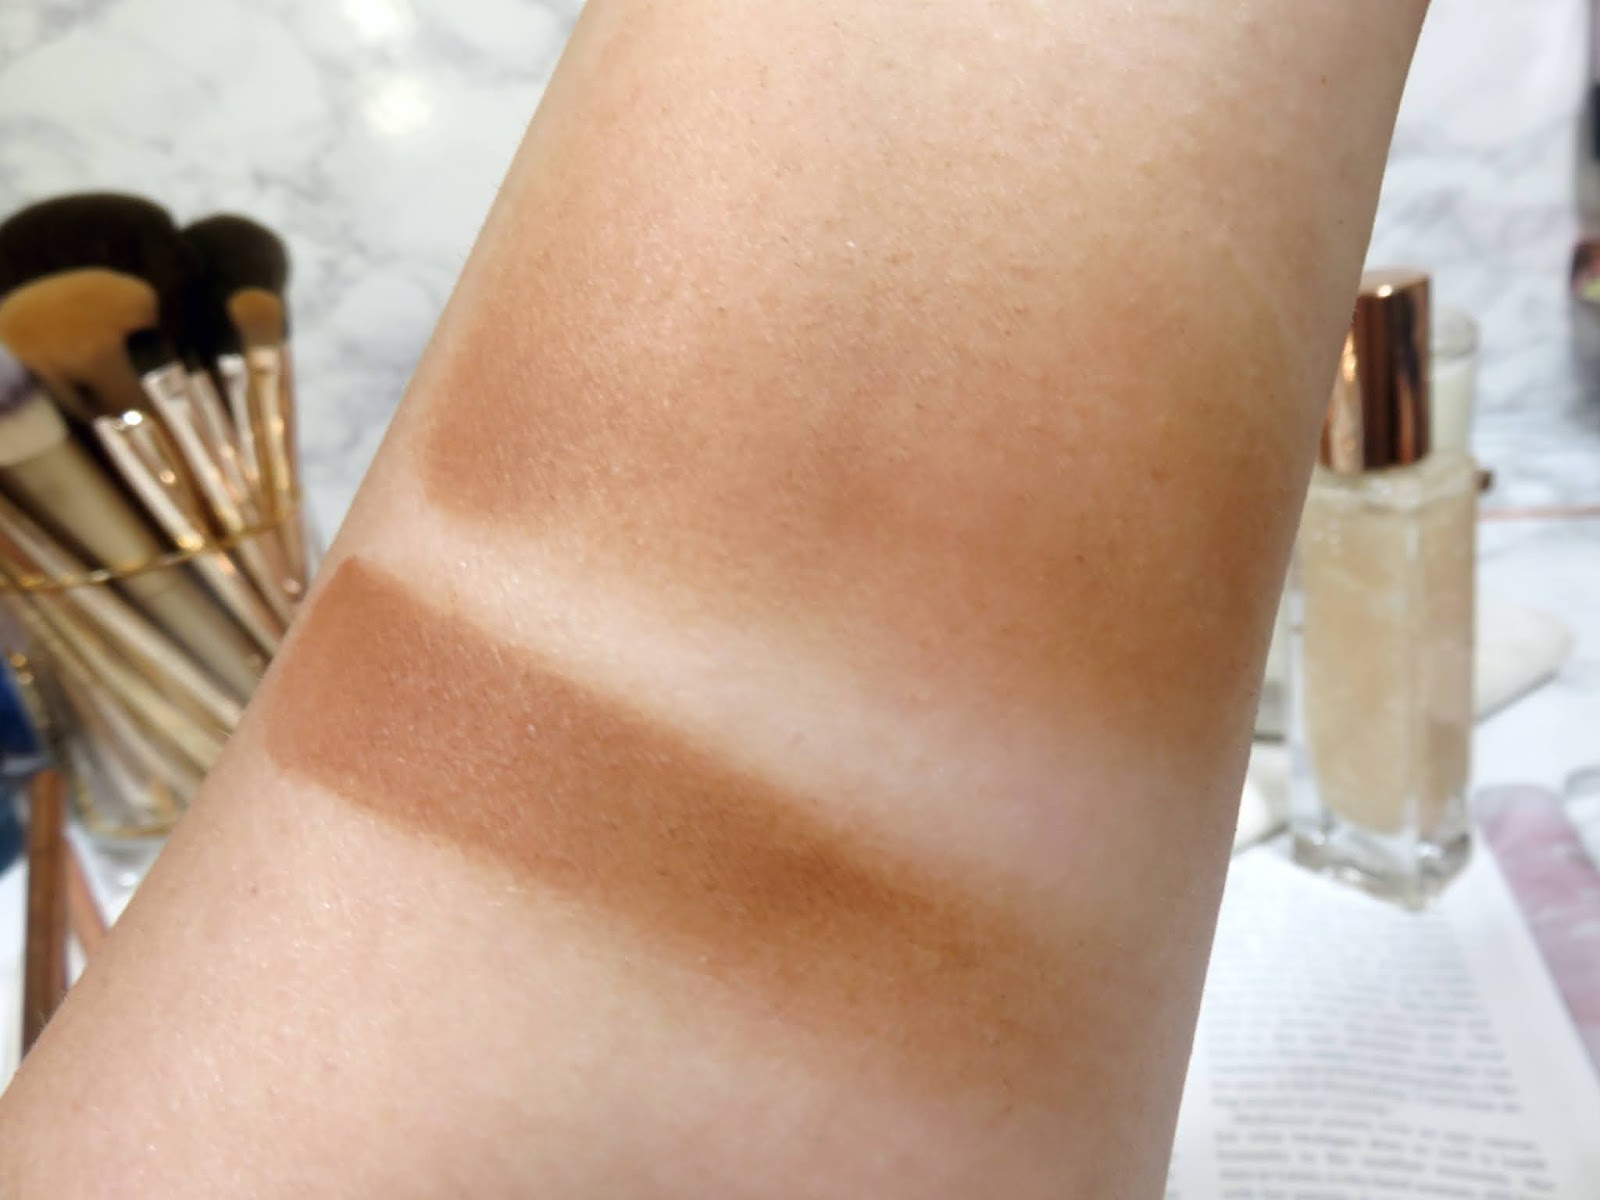 Charlotte Tilbury Airbrush Flawless Bronzer Review and Swatches